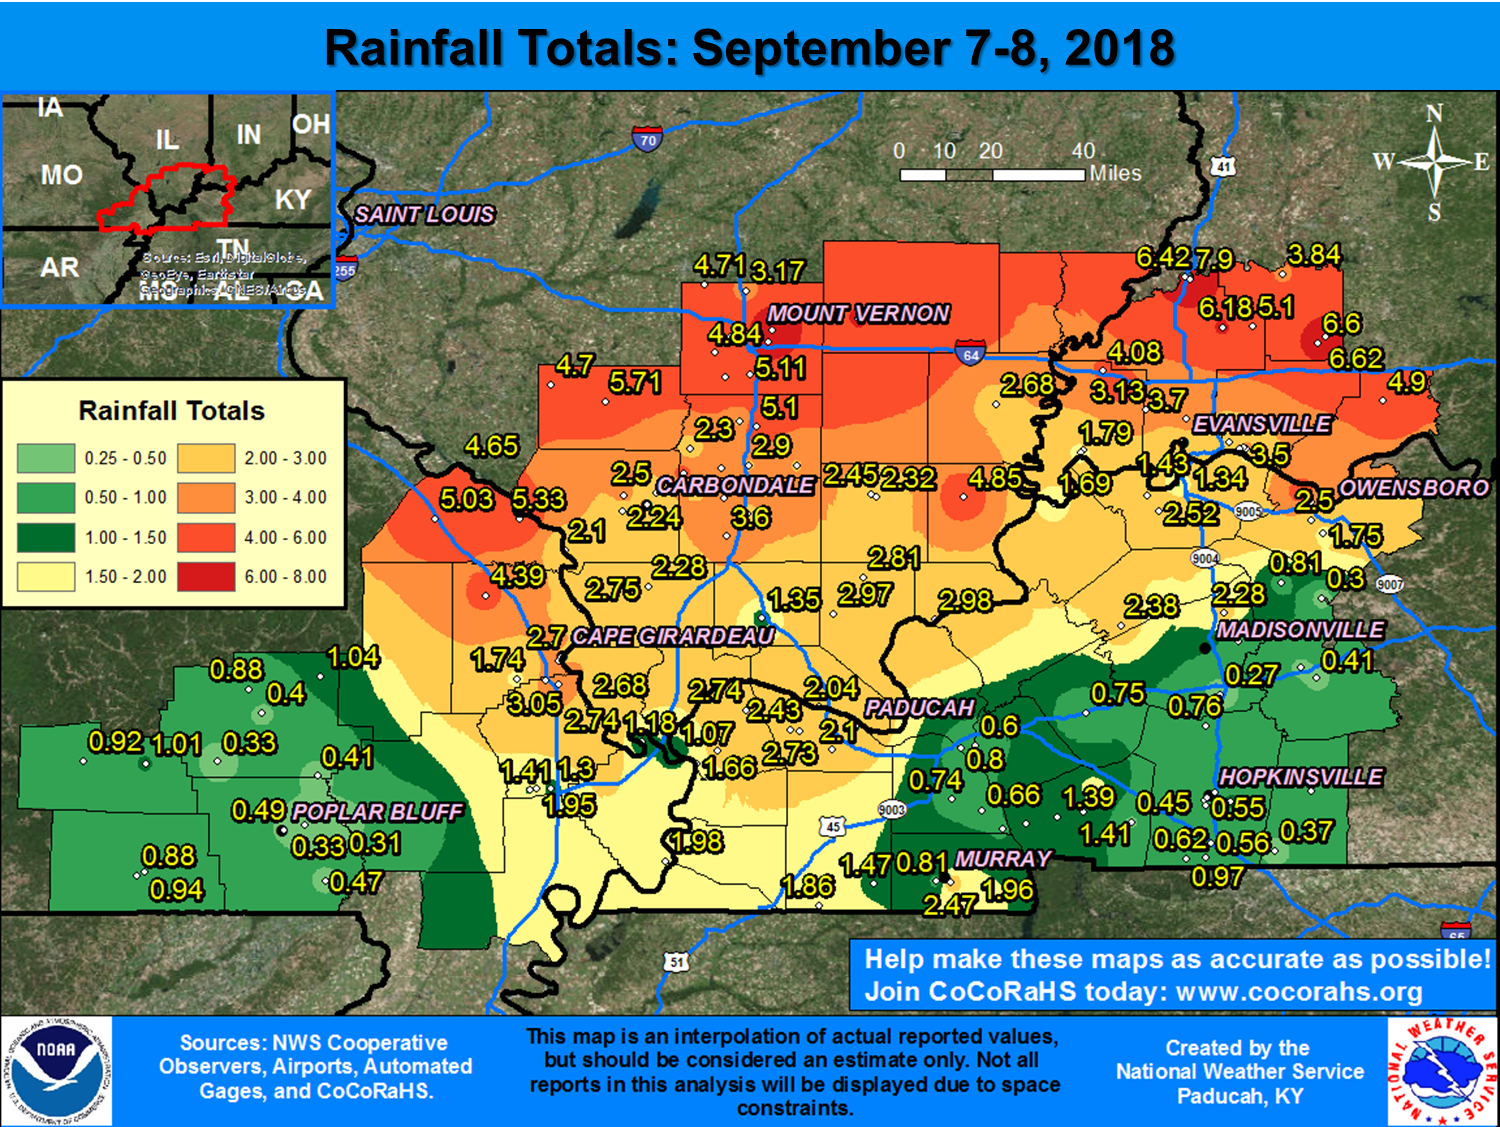 Rainfall totals for Sept. 7-8